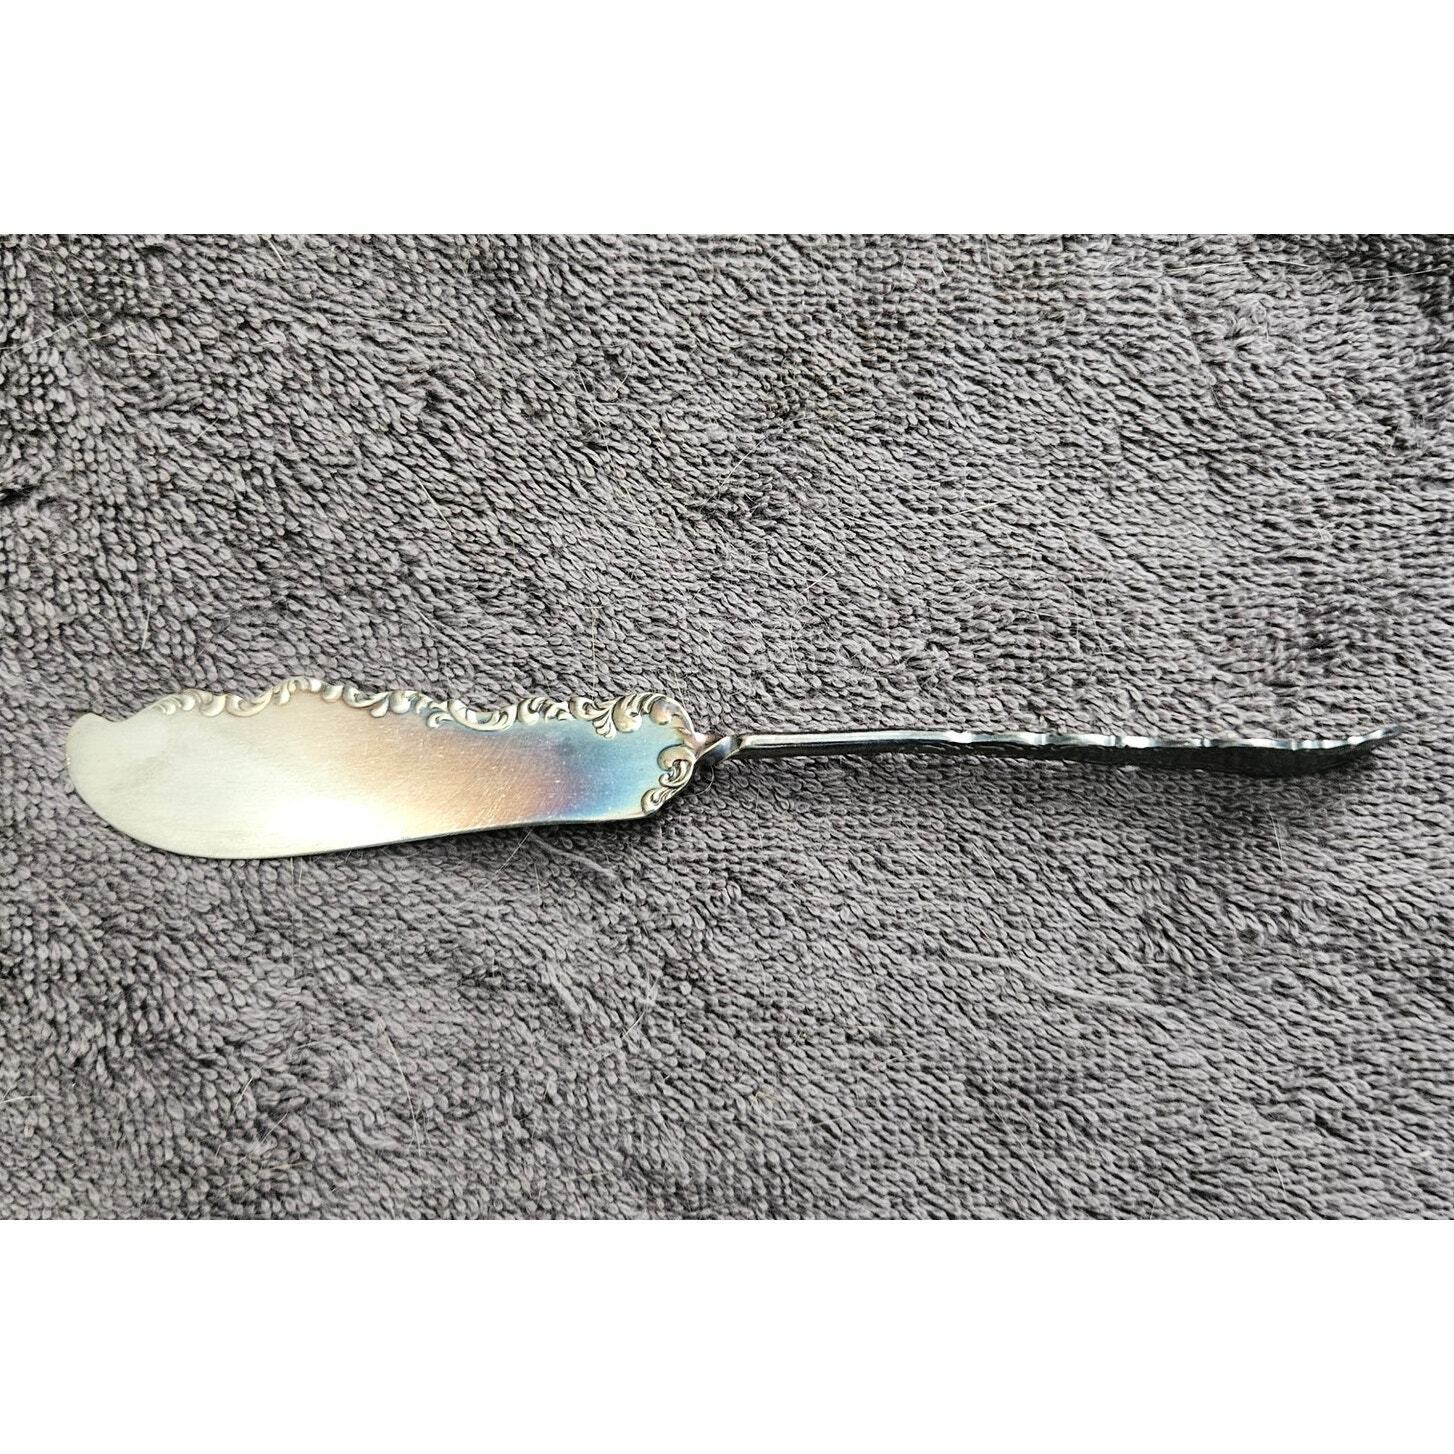 Wm Rogers & Son AA Antique 1894 Silver Plate Twisted Master Butter Knife